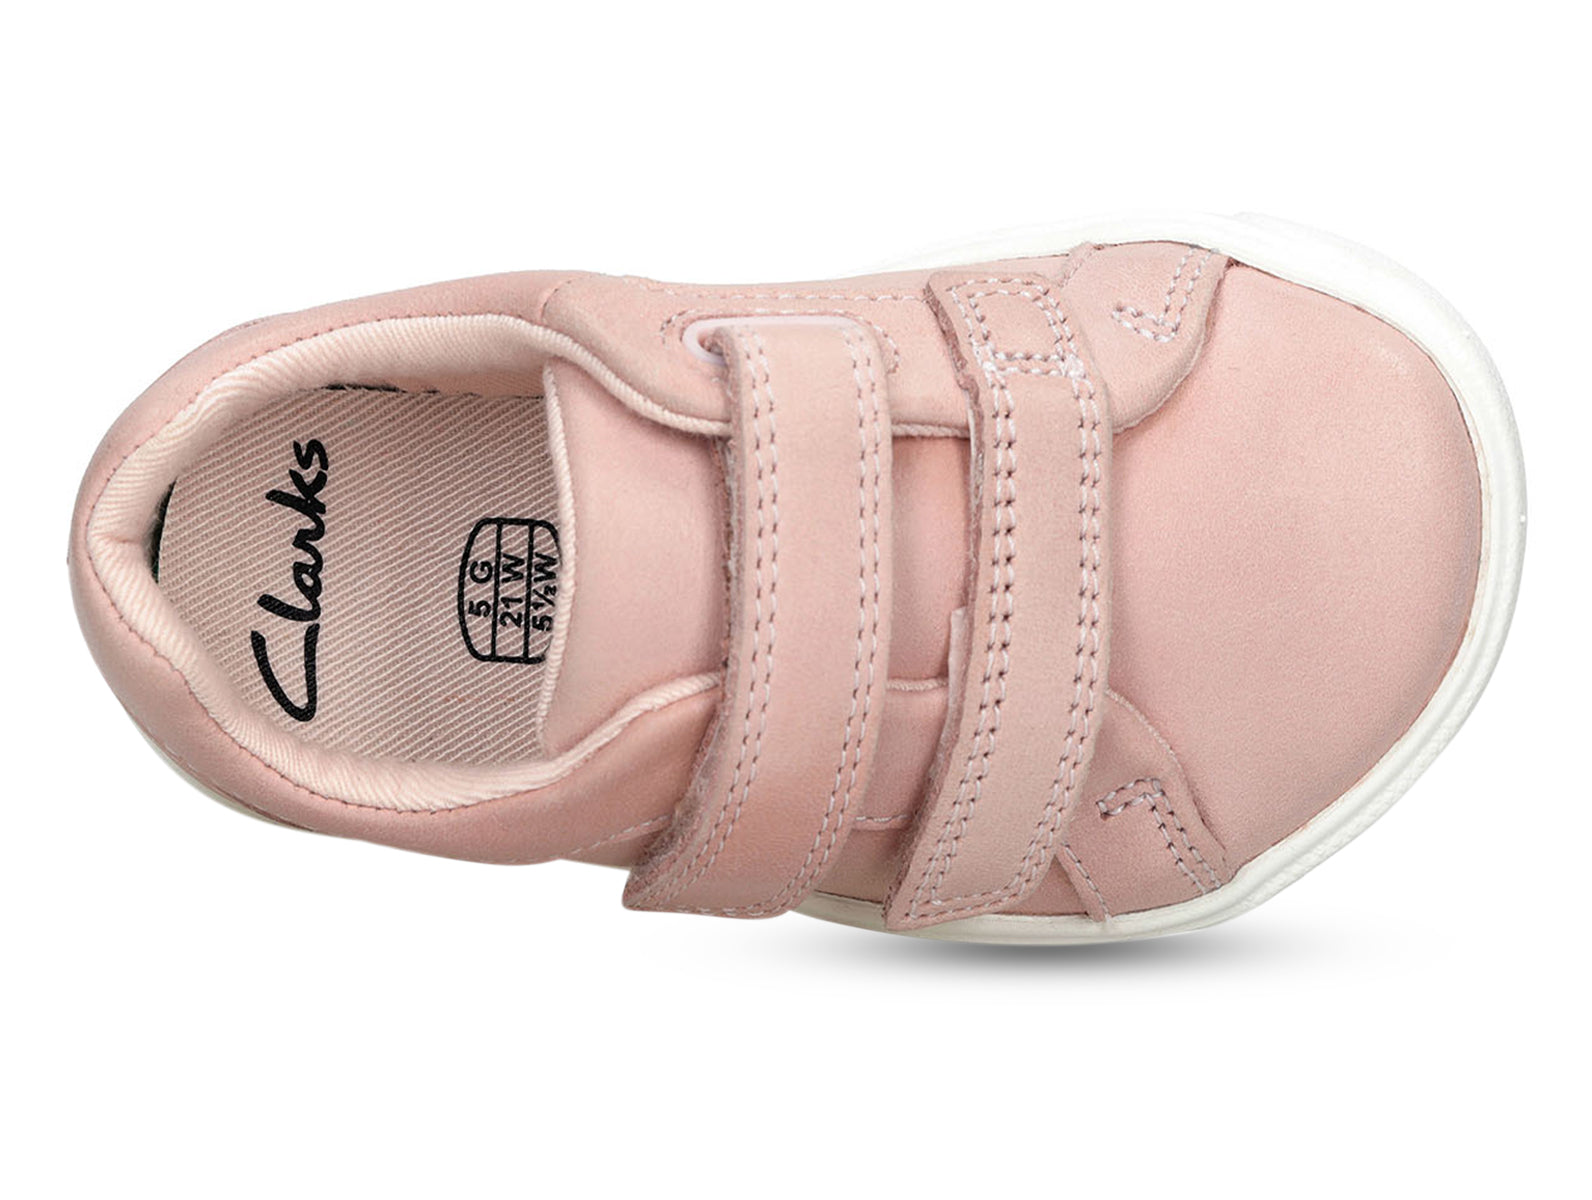 clarks city oasis lo toddler